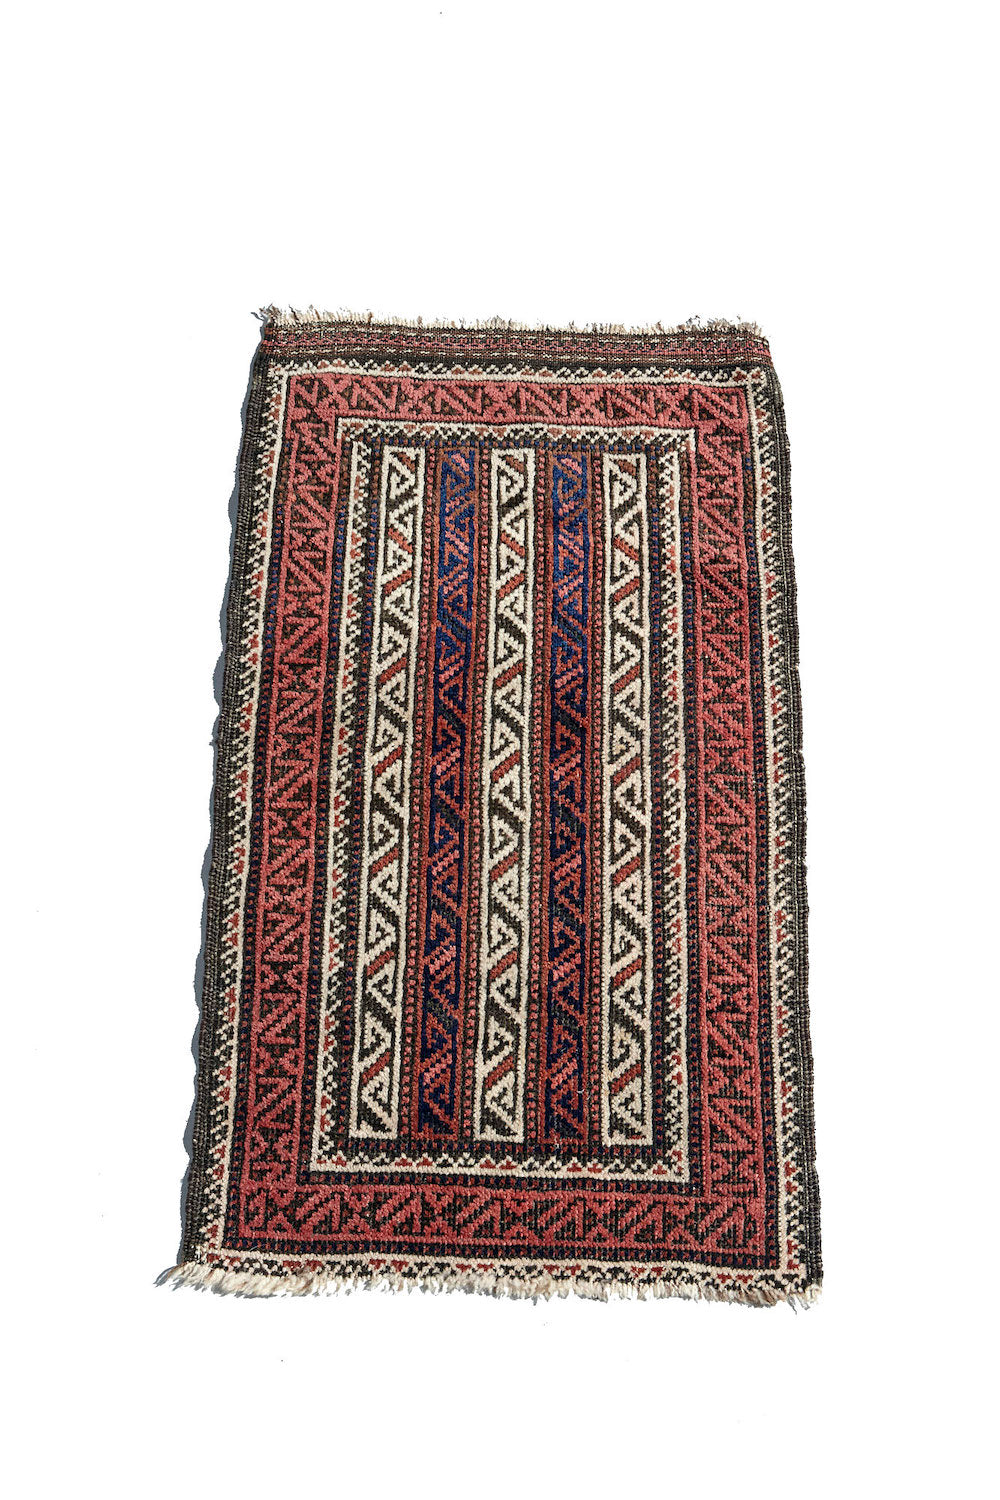 Baluch Persian Rug. Hand woven antique rug with zig zag patterns in cream and pink. Perfect for a bathroom, kitchen, bedroom or study. Available from King Kennedy Rugs Los Angeles